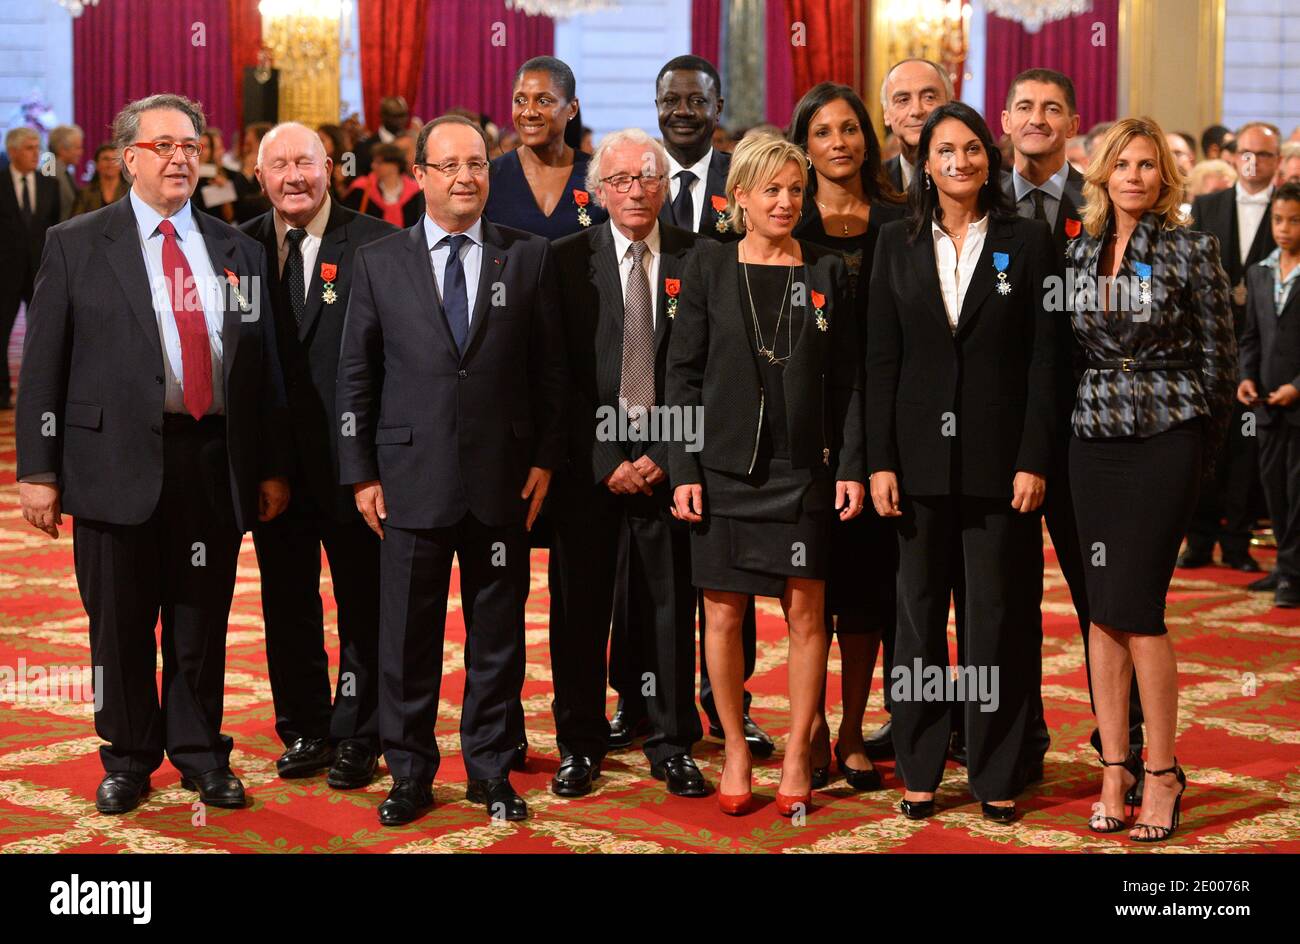 French President Francois Hollande (3rdL) poses with recipients of the Legion of Honor and National Order of Merit insignia during a ceremony to award French sports personalities at the Elysee Palace in Paris, France on October 9, 2013. From left: President of the French Federation of Athletics Bernard Amsalem, former French tennis coach Jean-Claude Perrin, French President Francois Hollande, triple Olympic Champion Marie-Jose Perec, sports journalist Jacques Vendroux, former Olympique de Marseille football club's president Pape Diouf, Olympic Judo champion Cecile Nowak-Grasso, 4x100m World ch Stock Photo